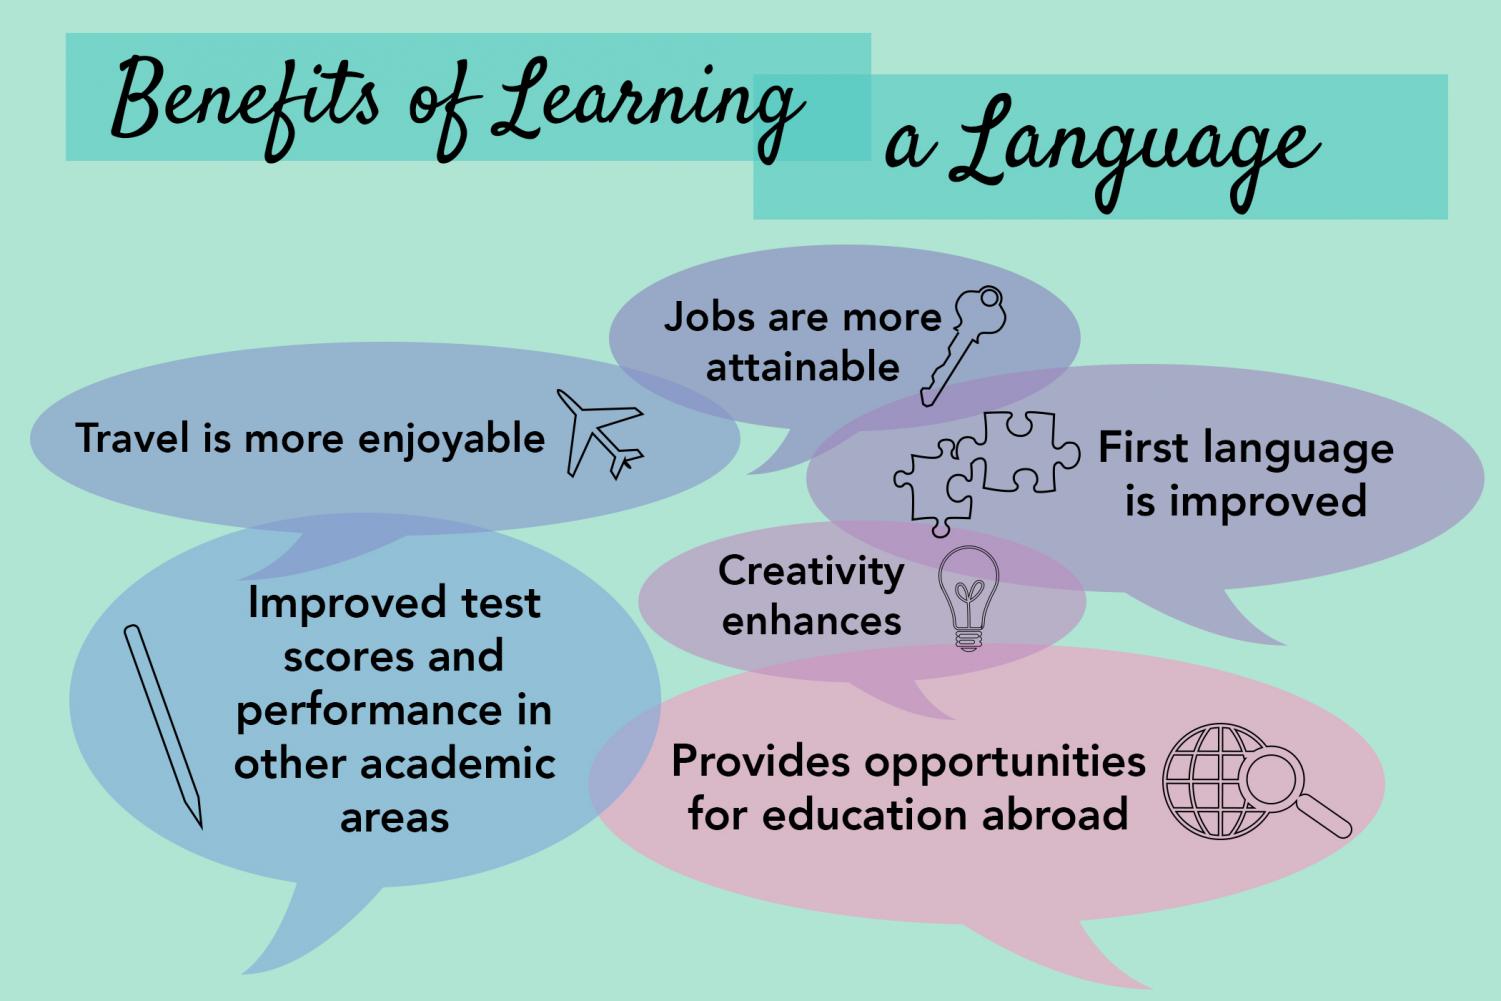 What language did you use. Benefits of Learning a Foreign language. Learn languages Wallpaper.